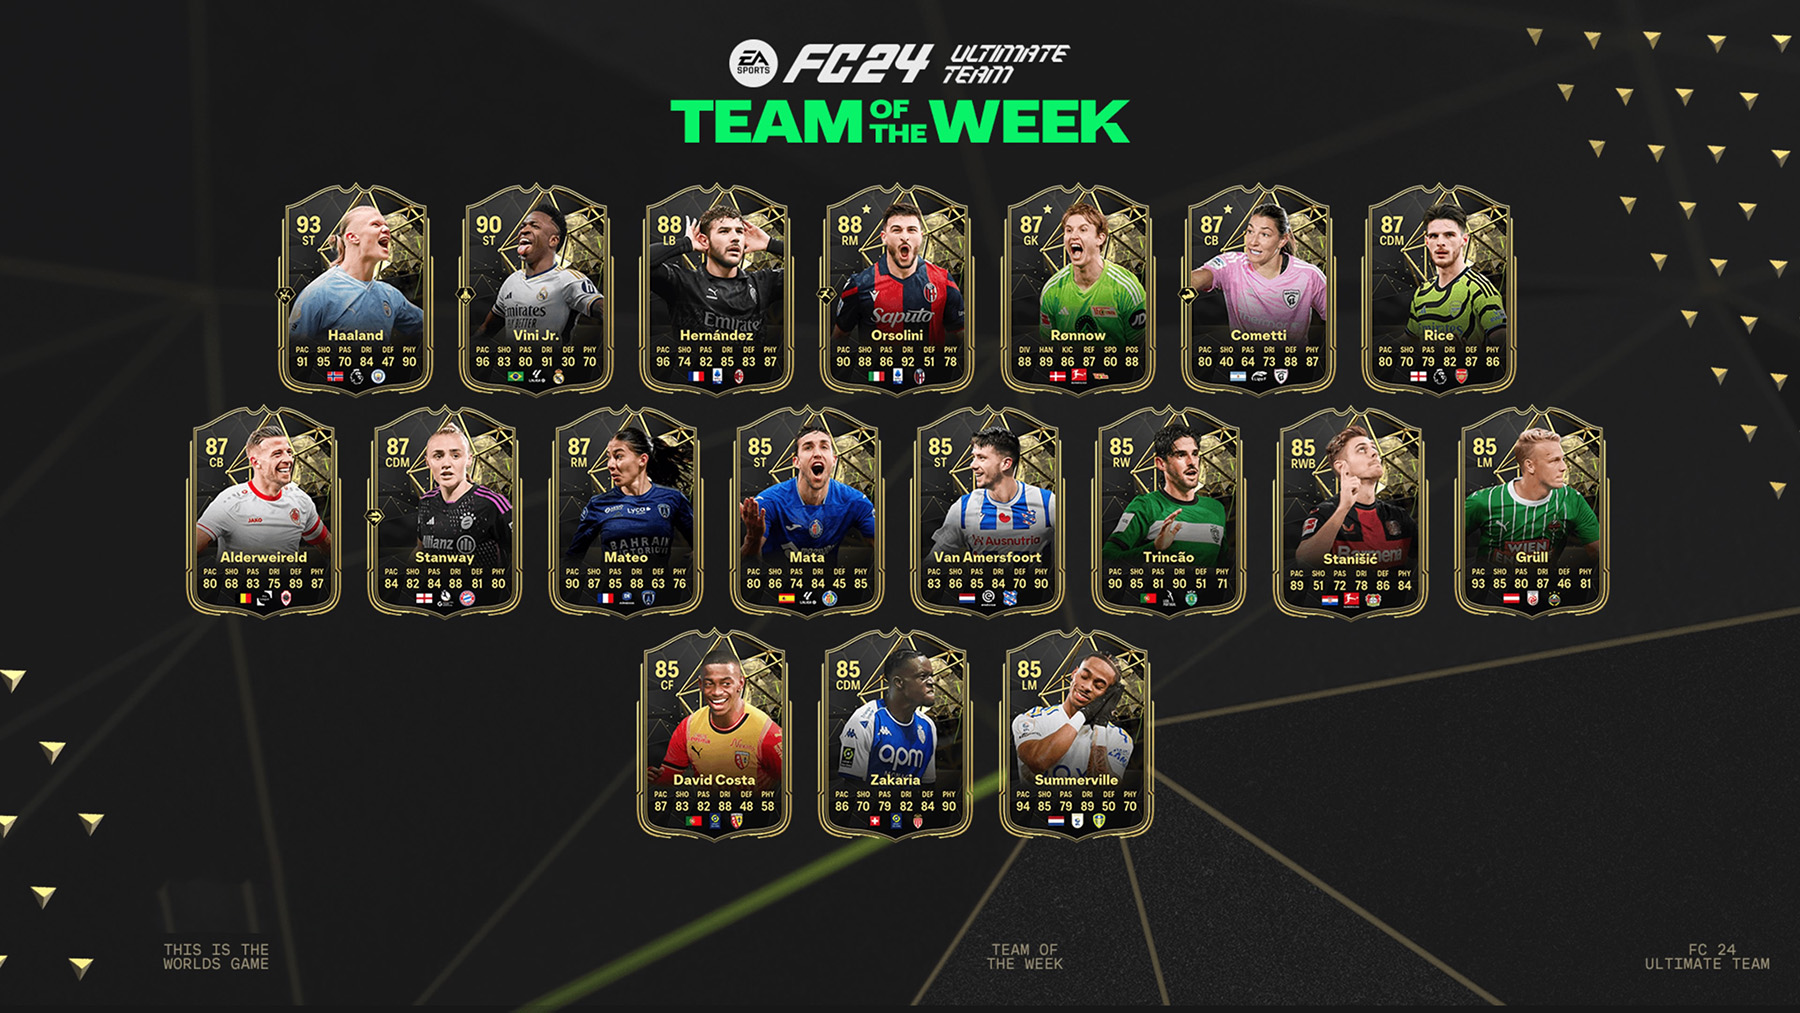 EA Sports FC 24 Team of the Week 22 is available from 14 Feb (6pm UK).